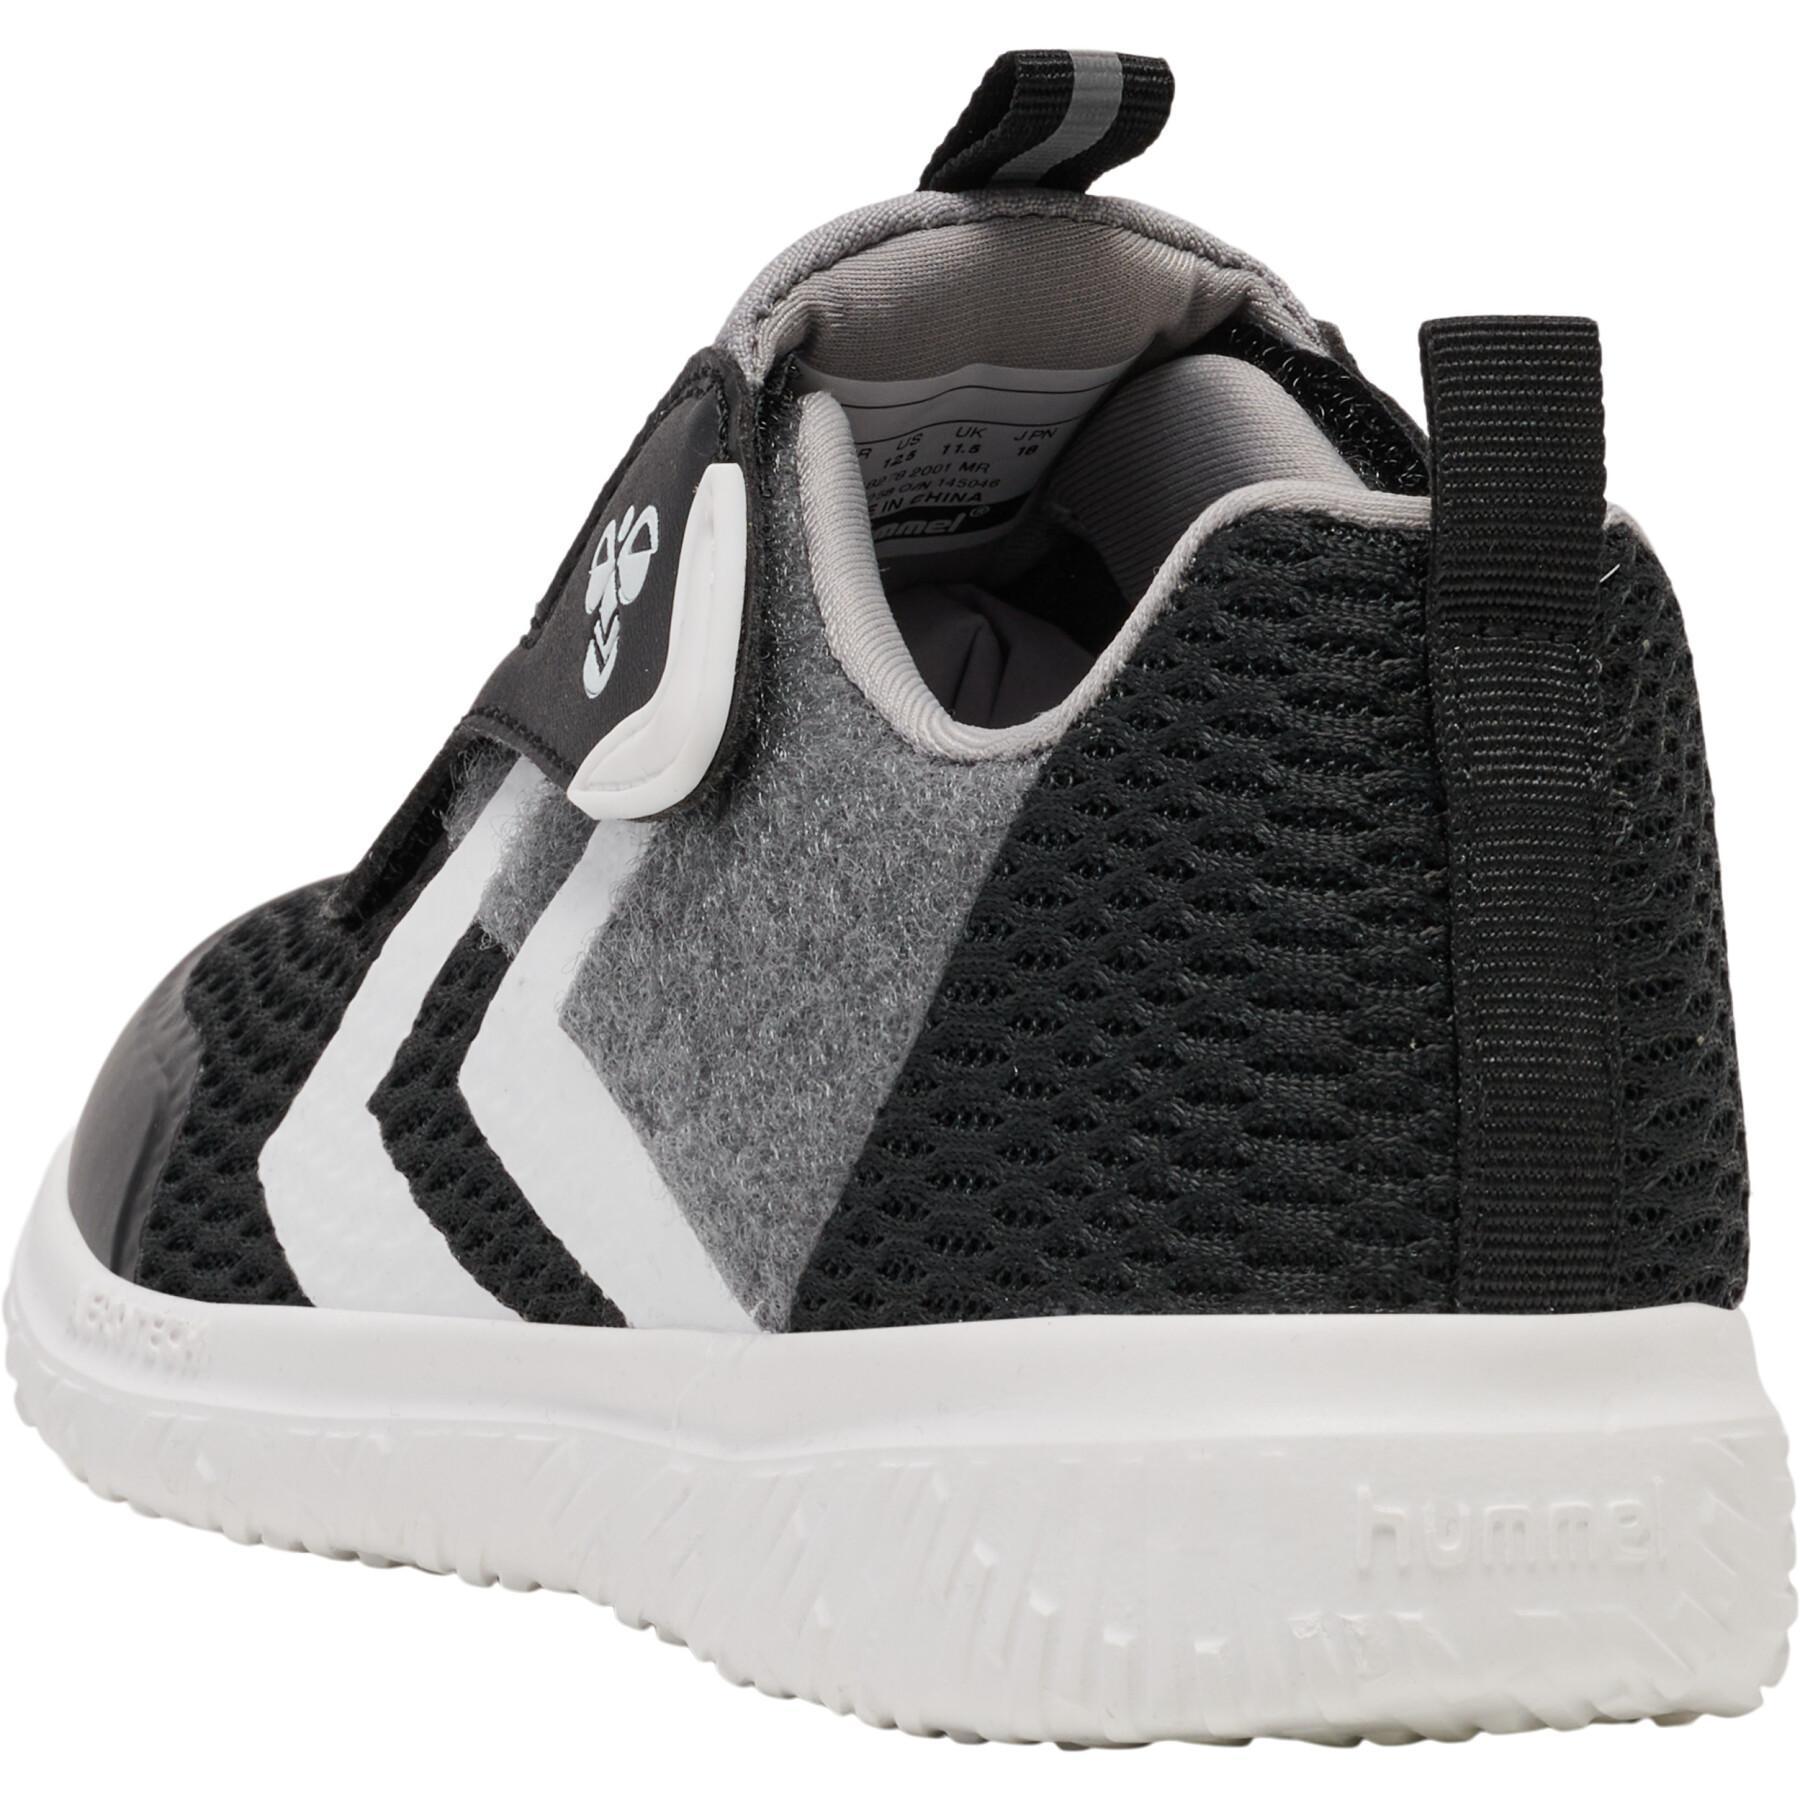 Children's sneakers Hummel Actus Super Fit Recycled